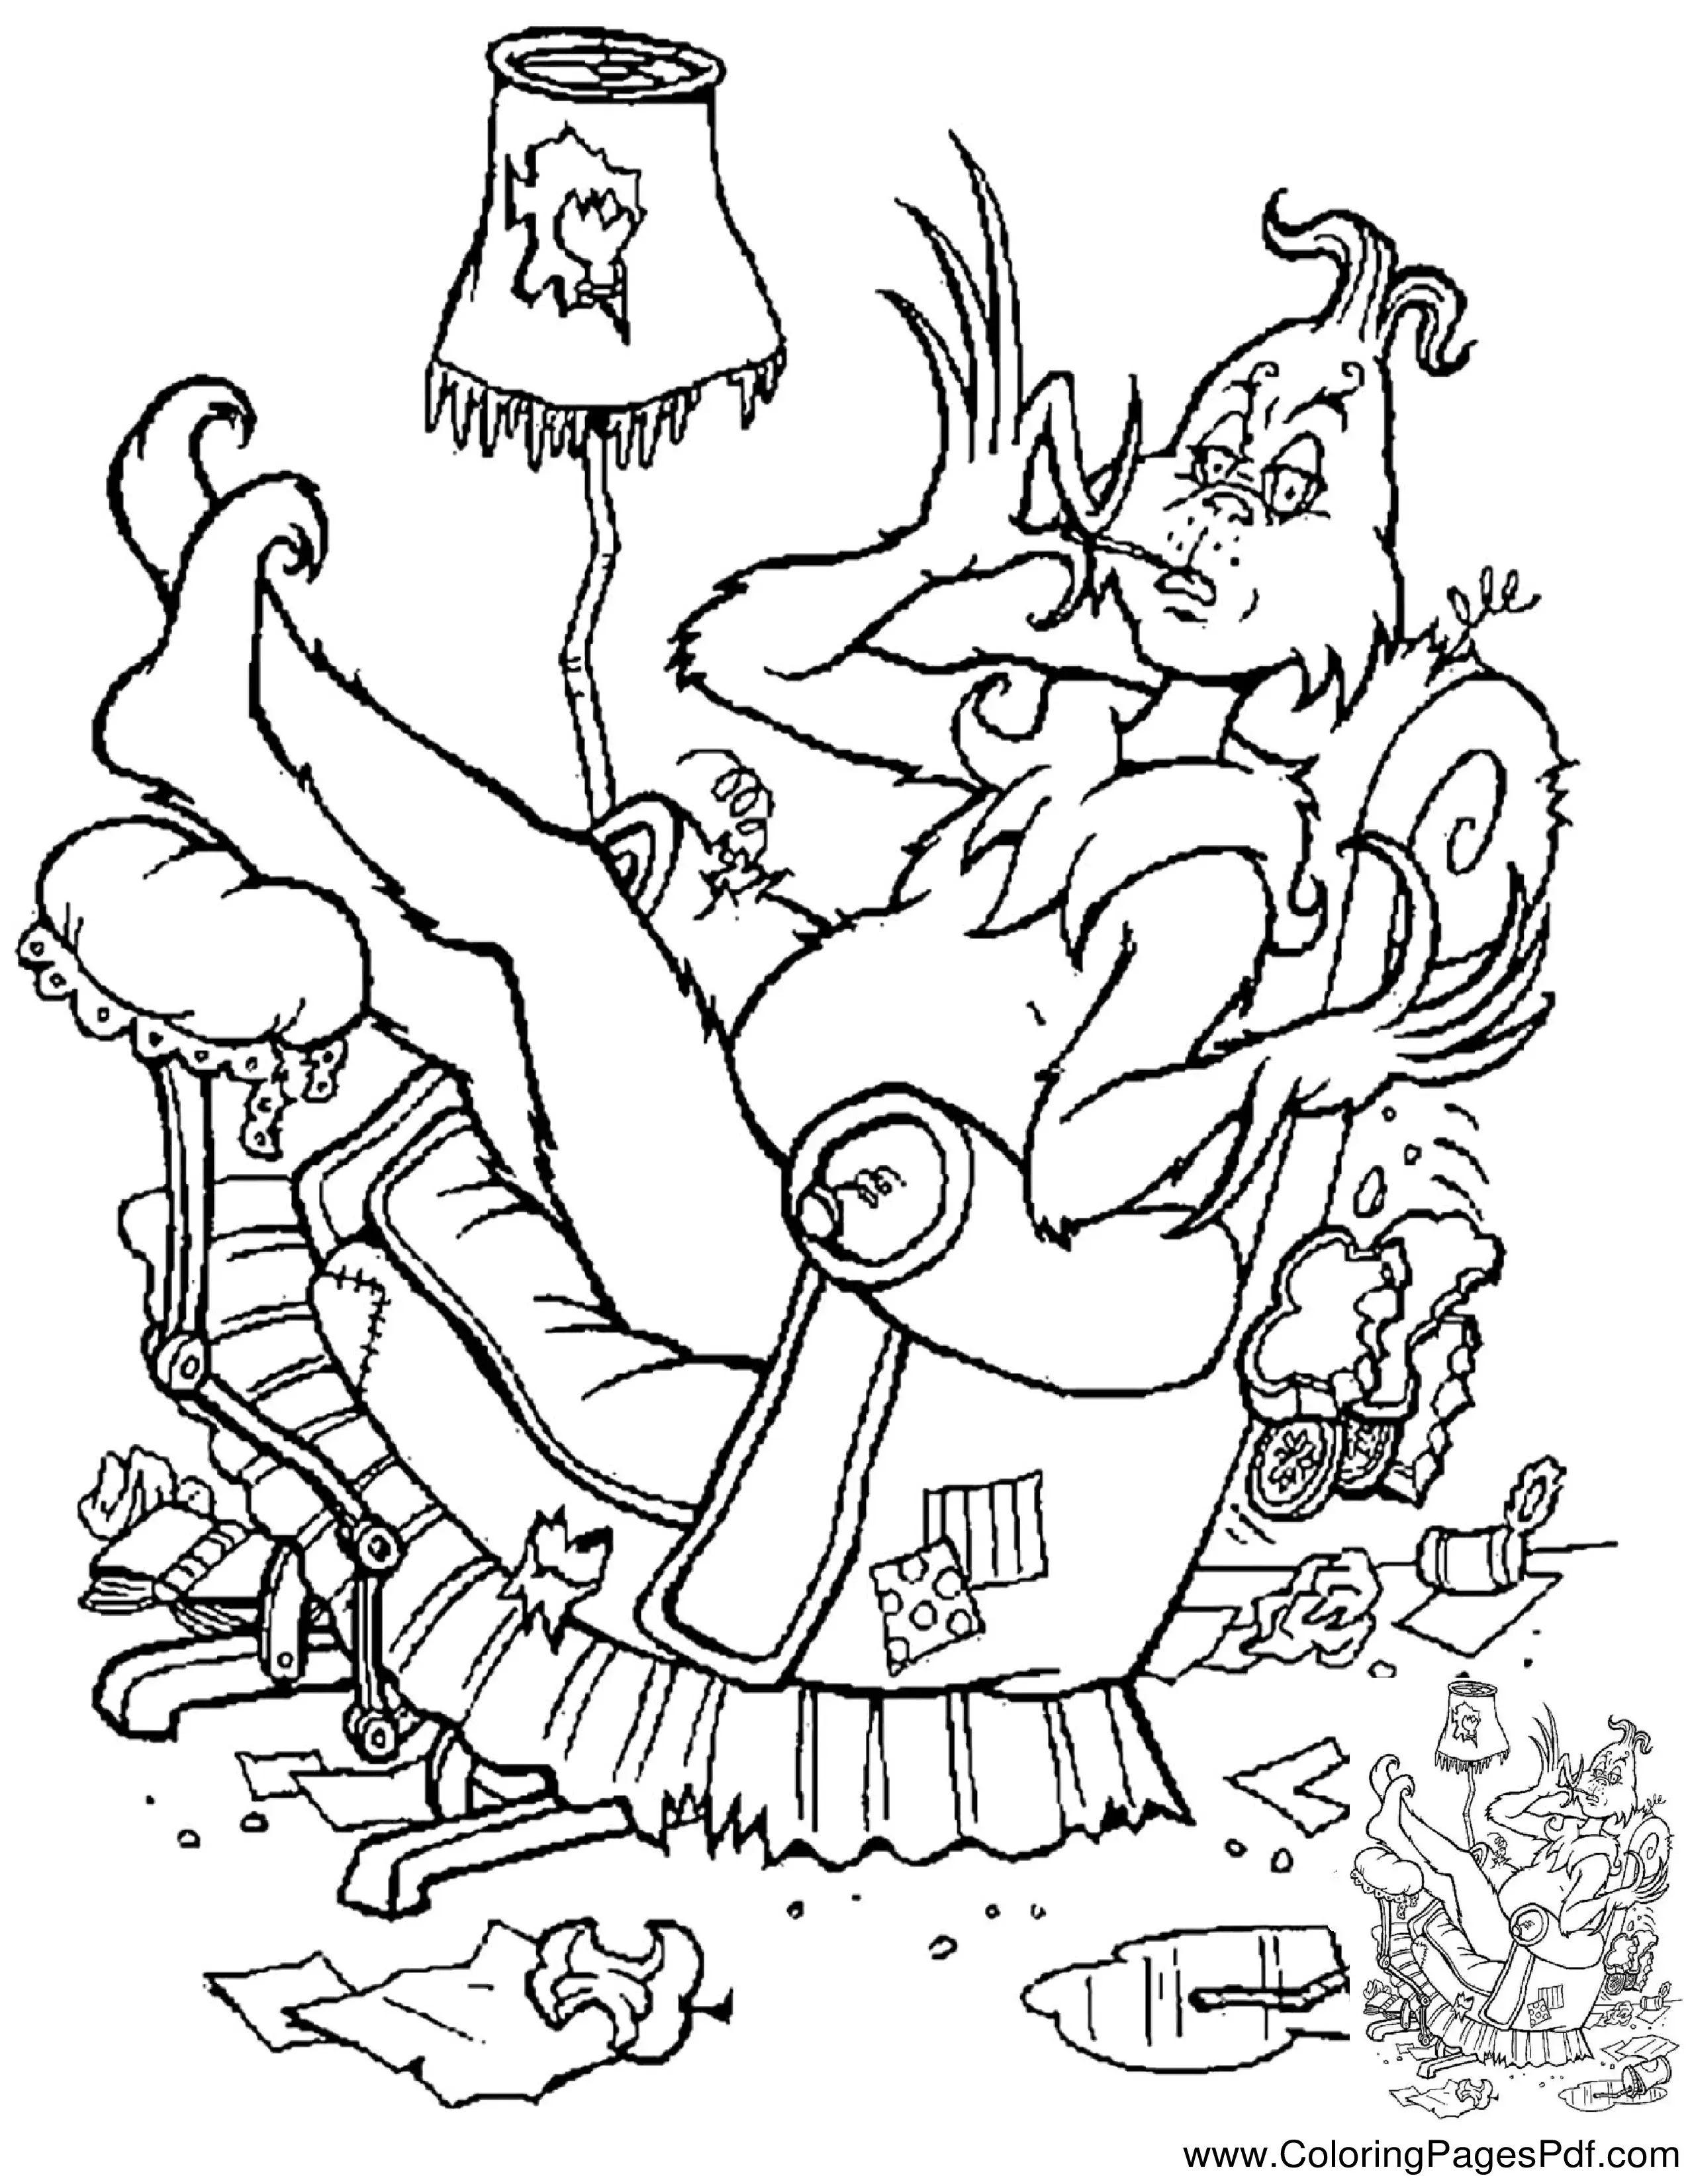 Messy Grinch Scene Coloring Page